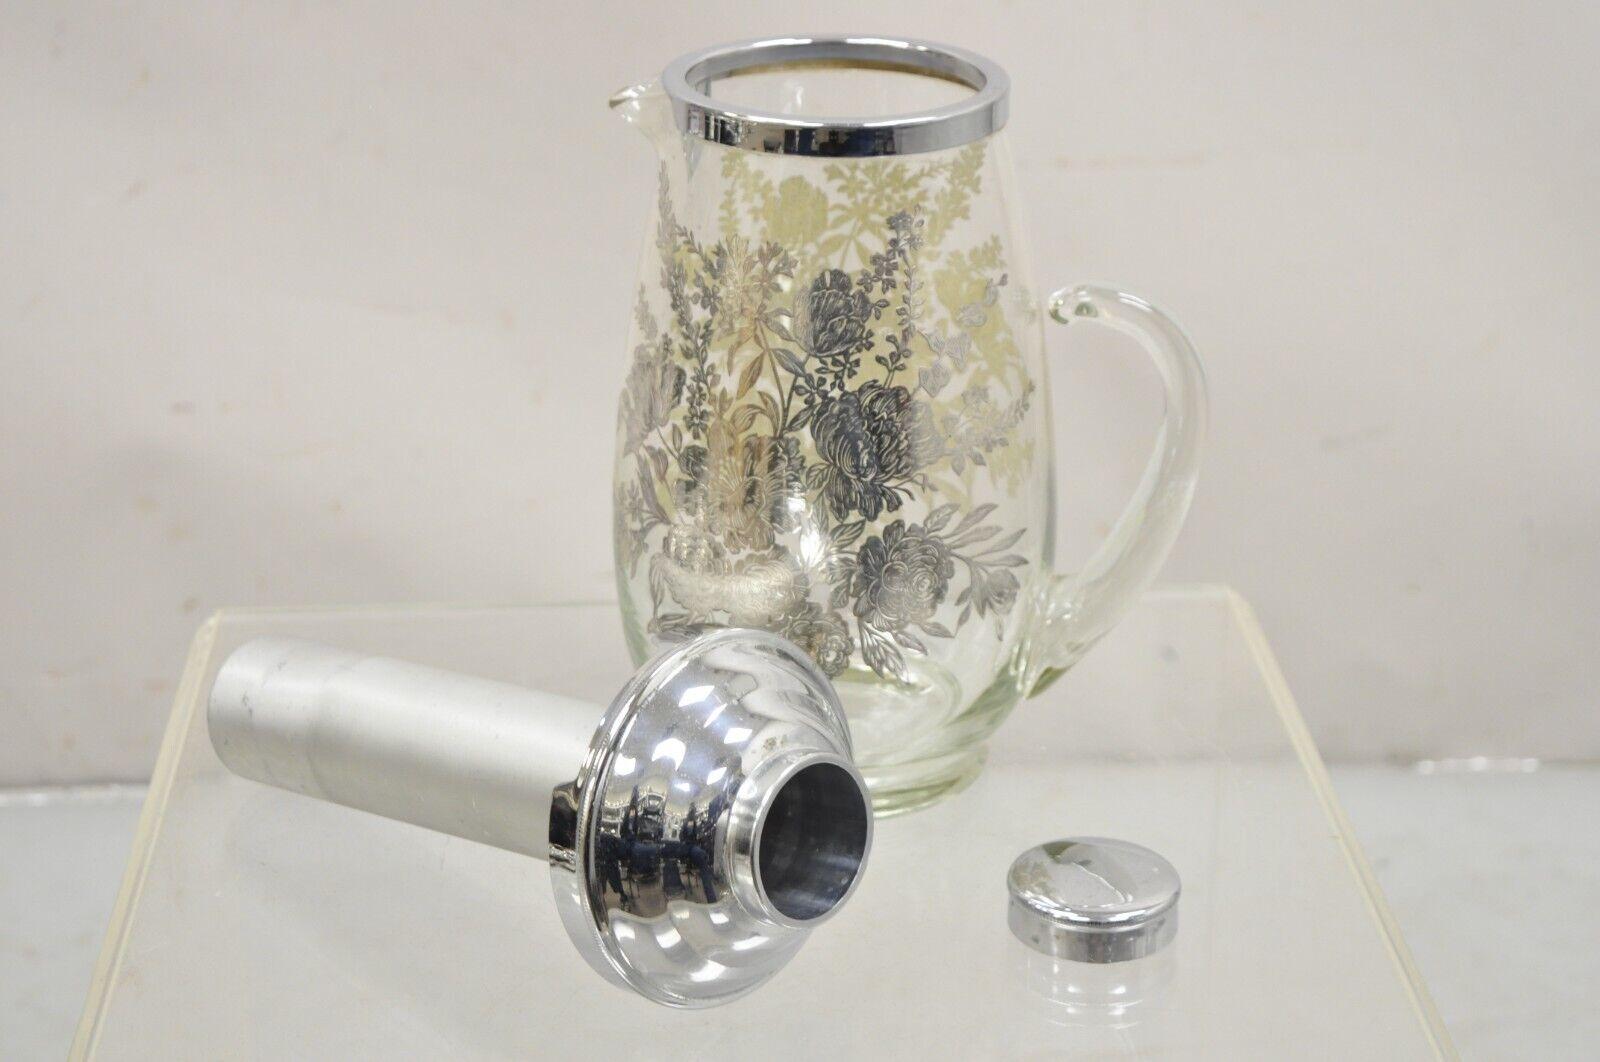 Vintage Cambridge Art Nouveau Floral Sterling Silver Overlay Glass Lemonade Pitcher w/ Ice Caddy. Item features a blown glass handle, sterling silver overlay, marked 